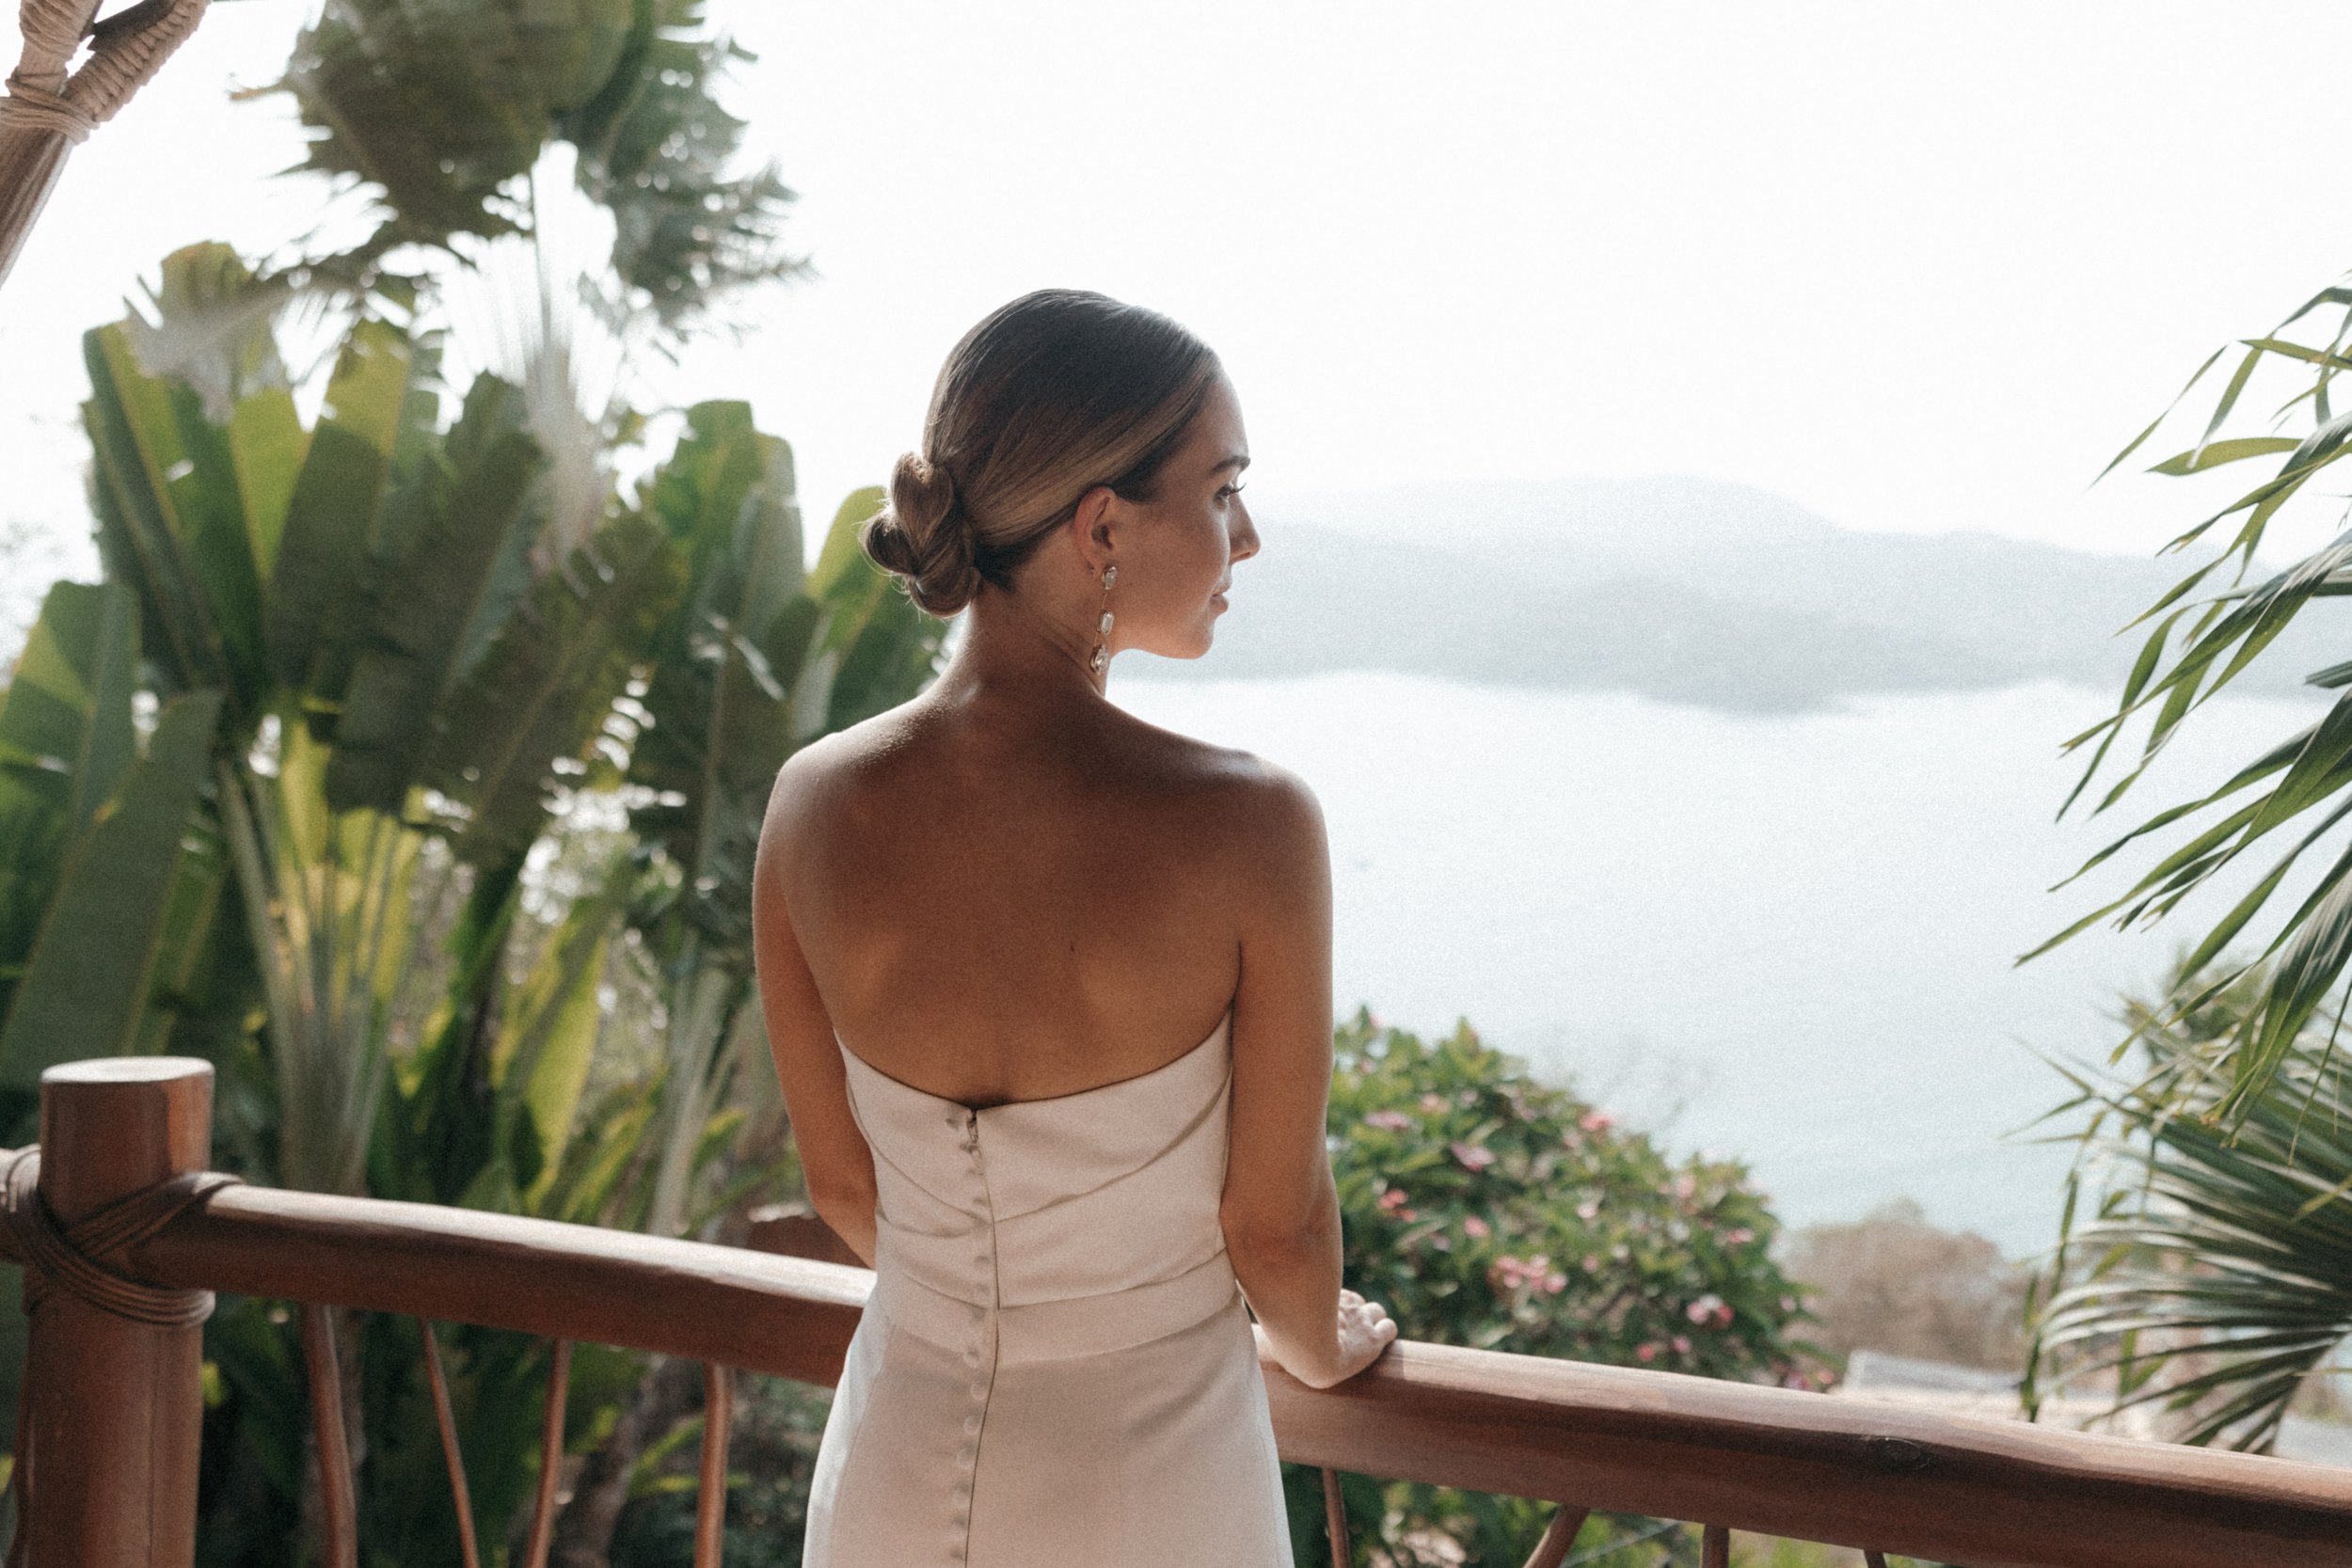 bride from florida plans the chic and tropical destination wedding of her dreams in zihuatanejo, mexico